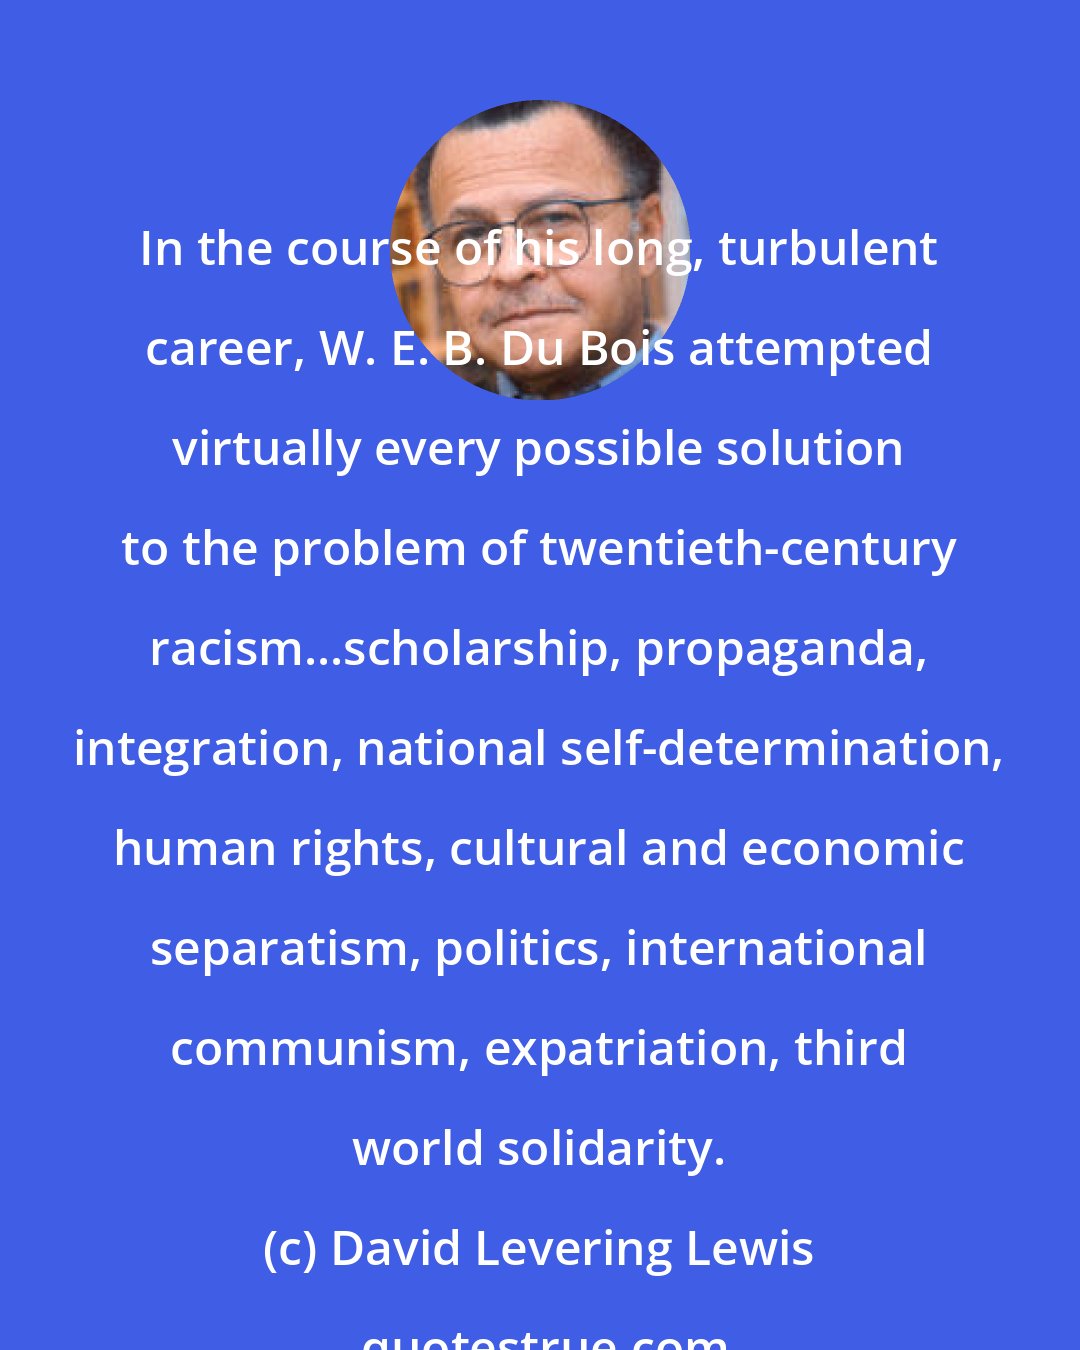 David Levering Lewis: In the course of his long, turbulent career, W. E. B. Du Bois attempted virtually every possible solution to the problem of twentieth-century racism...scholarship, propaganda, integration, national self-determination, human rights, cultural and economic separatism, politics, international communism, expatriation, third world solidarity.